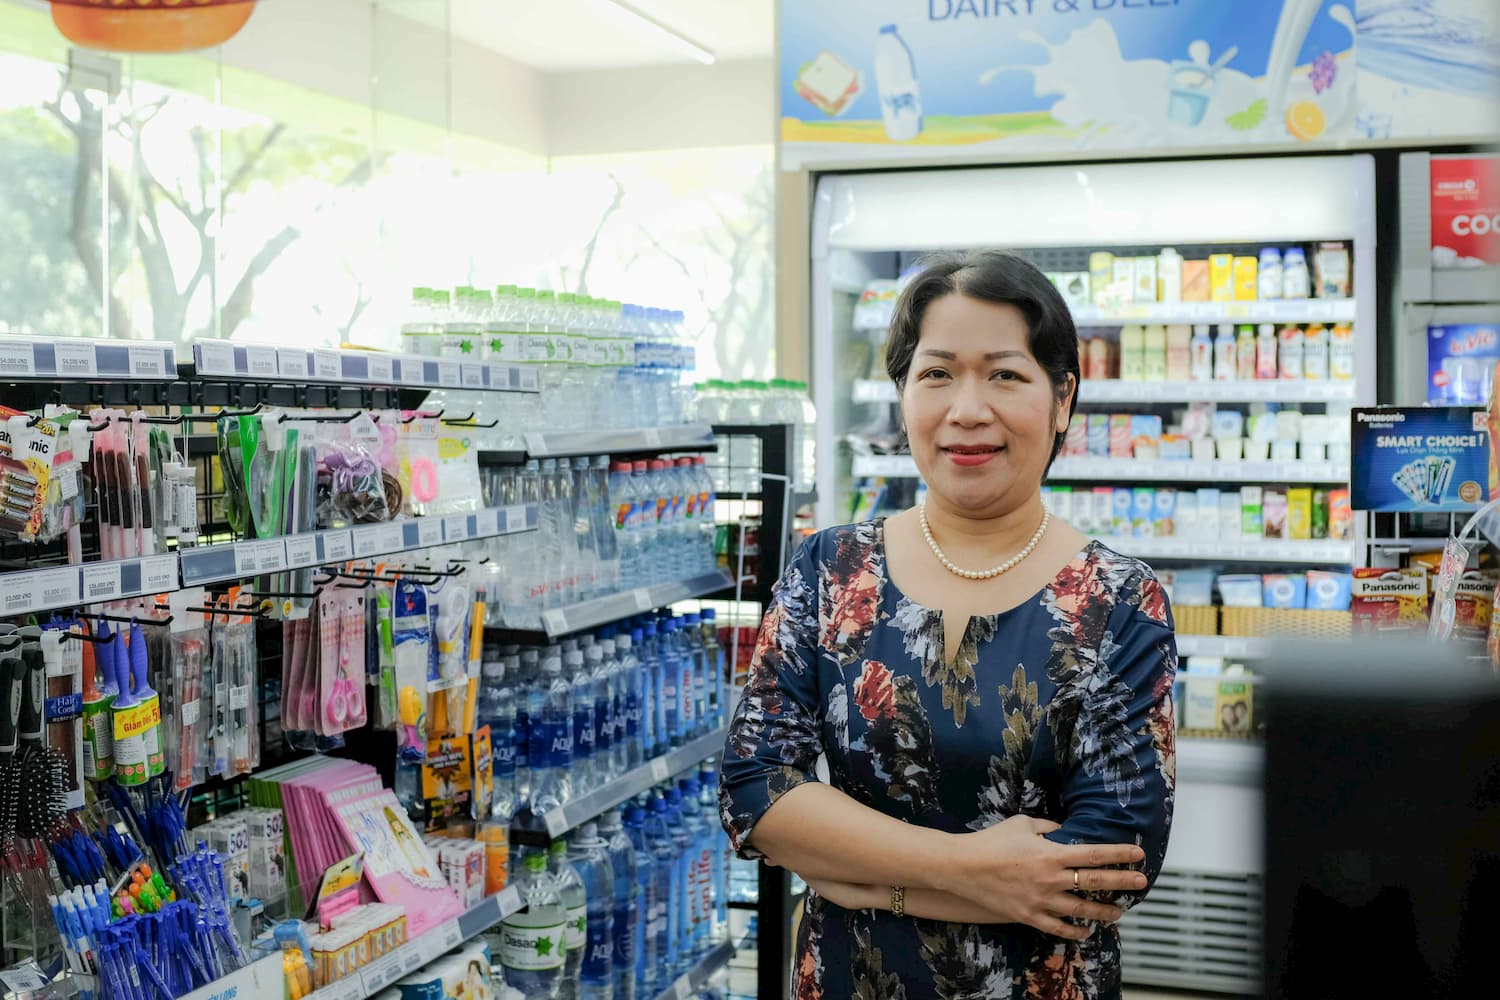 Dr Nguyen Anh Thu's research ' A consumer definition of eco-friendly packagin' revealed three key elements that impacted consumer behaviour: packaging materials, manufacturing technology and market appeal. 